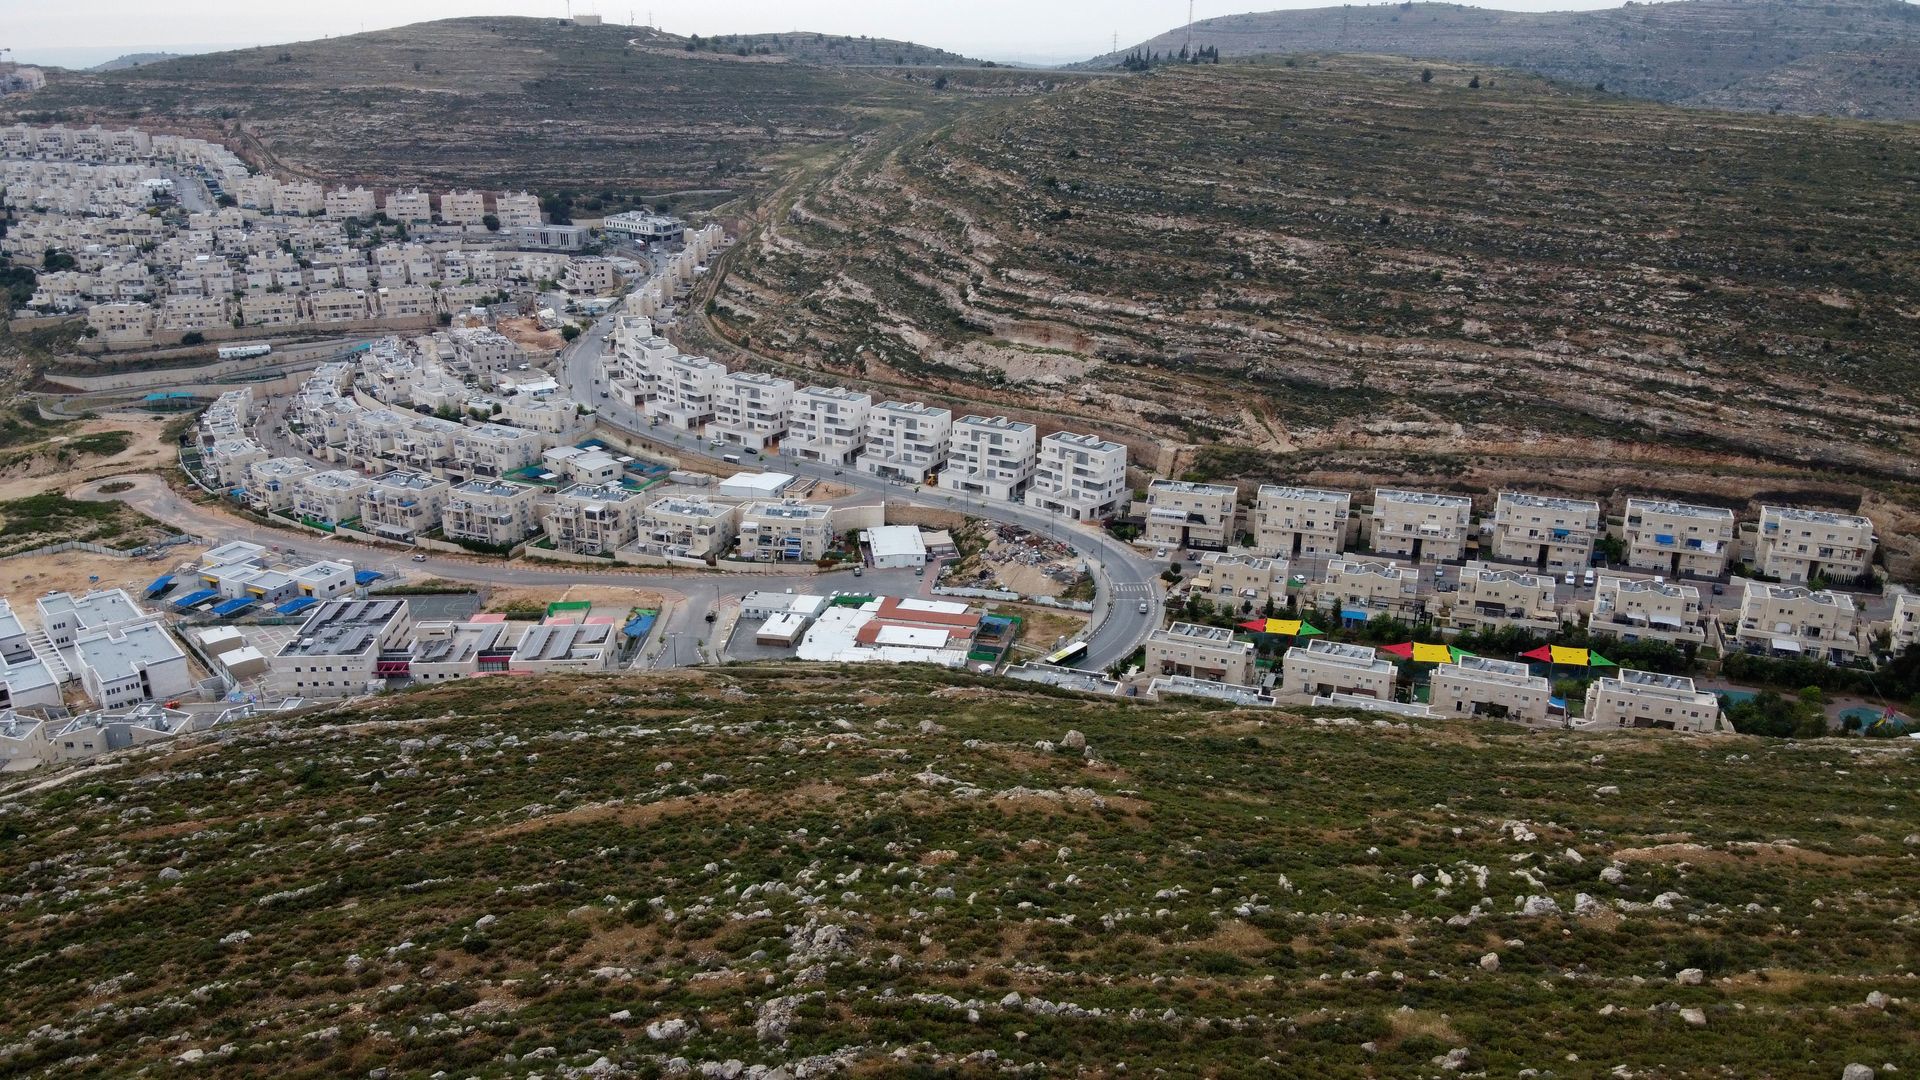 The Jewish settlement of Givat Zeev, near the Israeli-occupied West Bank city of Ramallah.